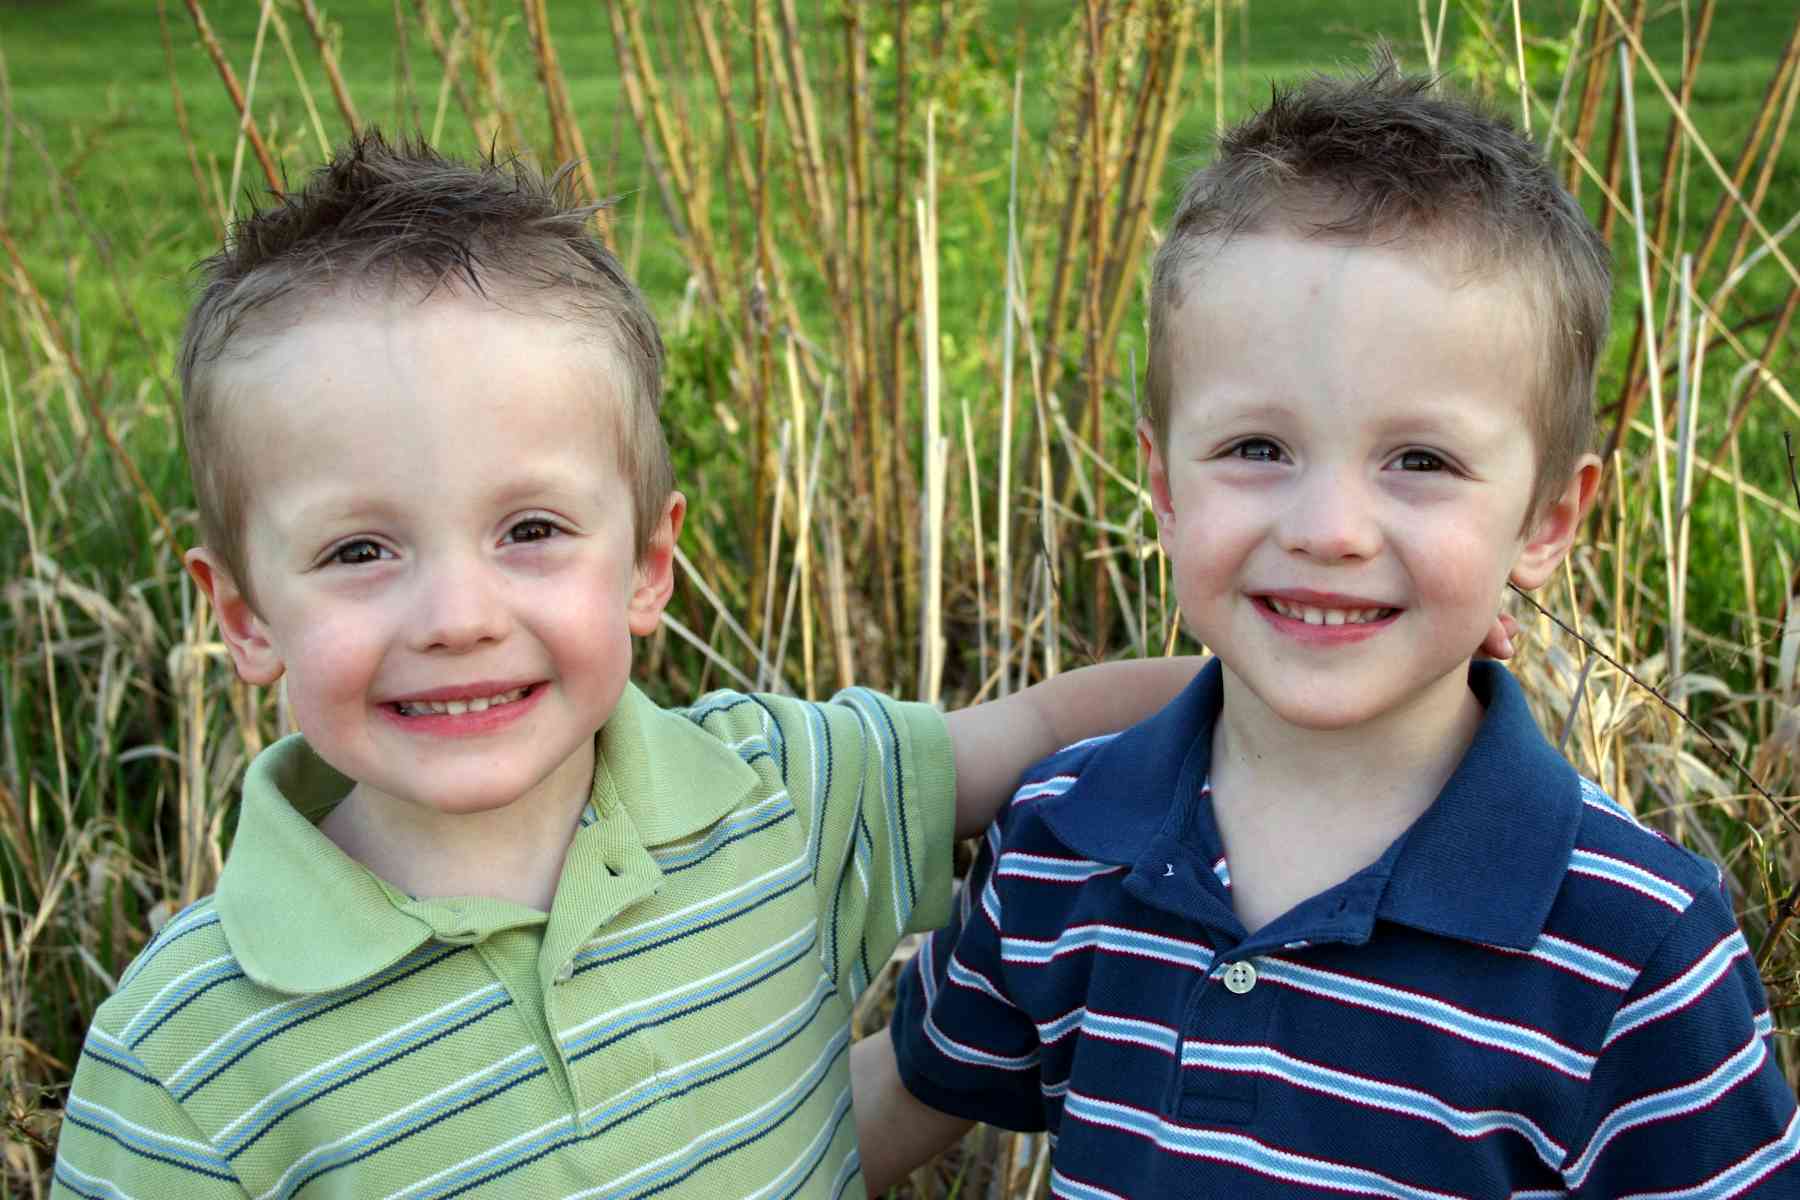 curious-kids-why-are-some-twins-identical-and-some-not